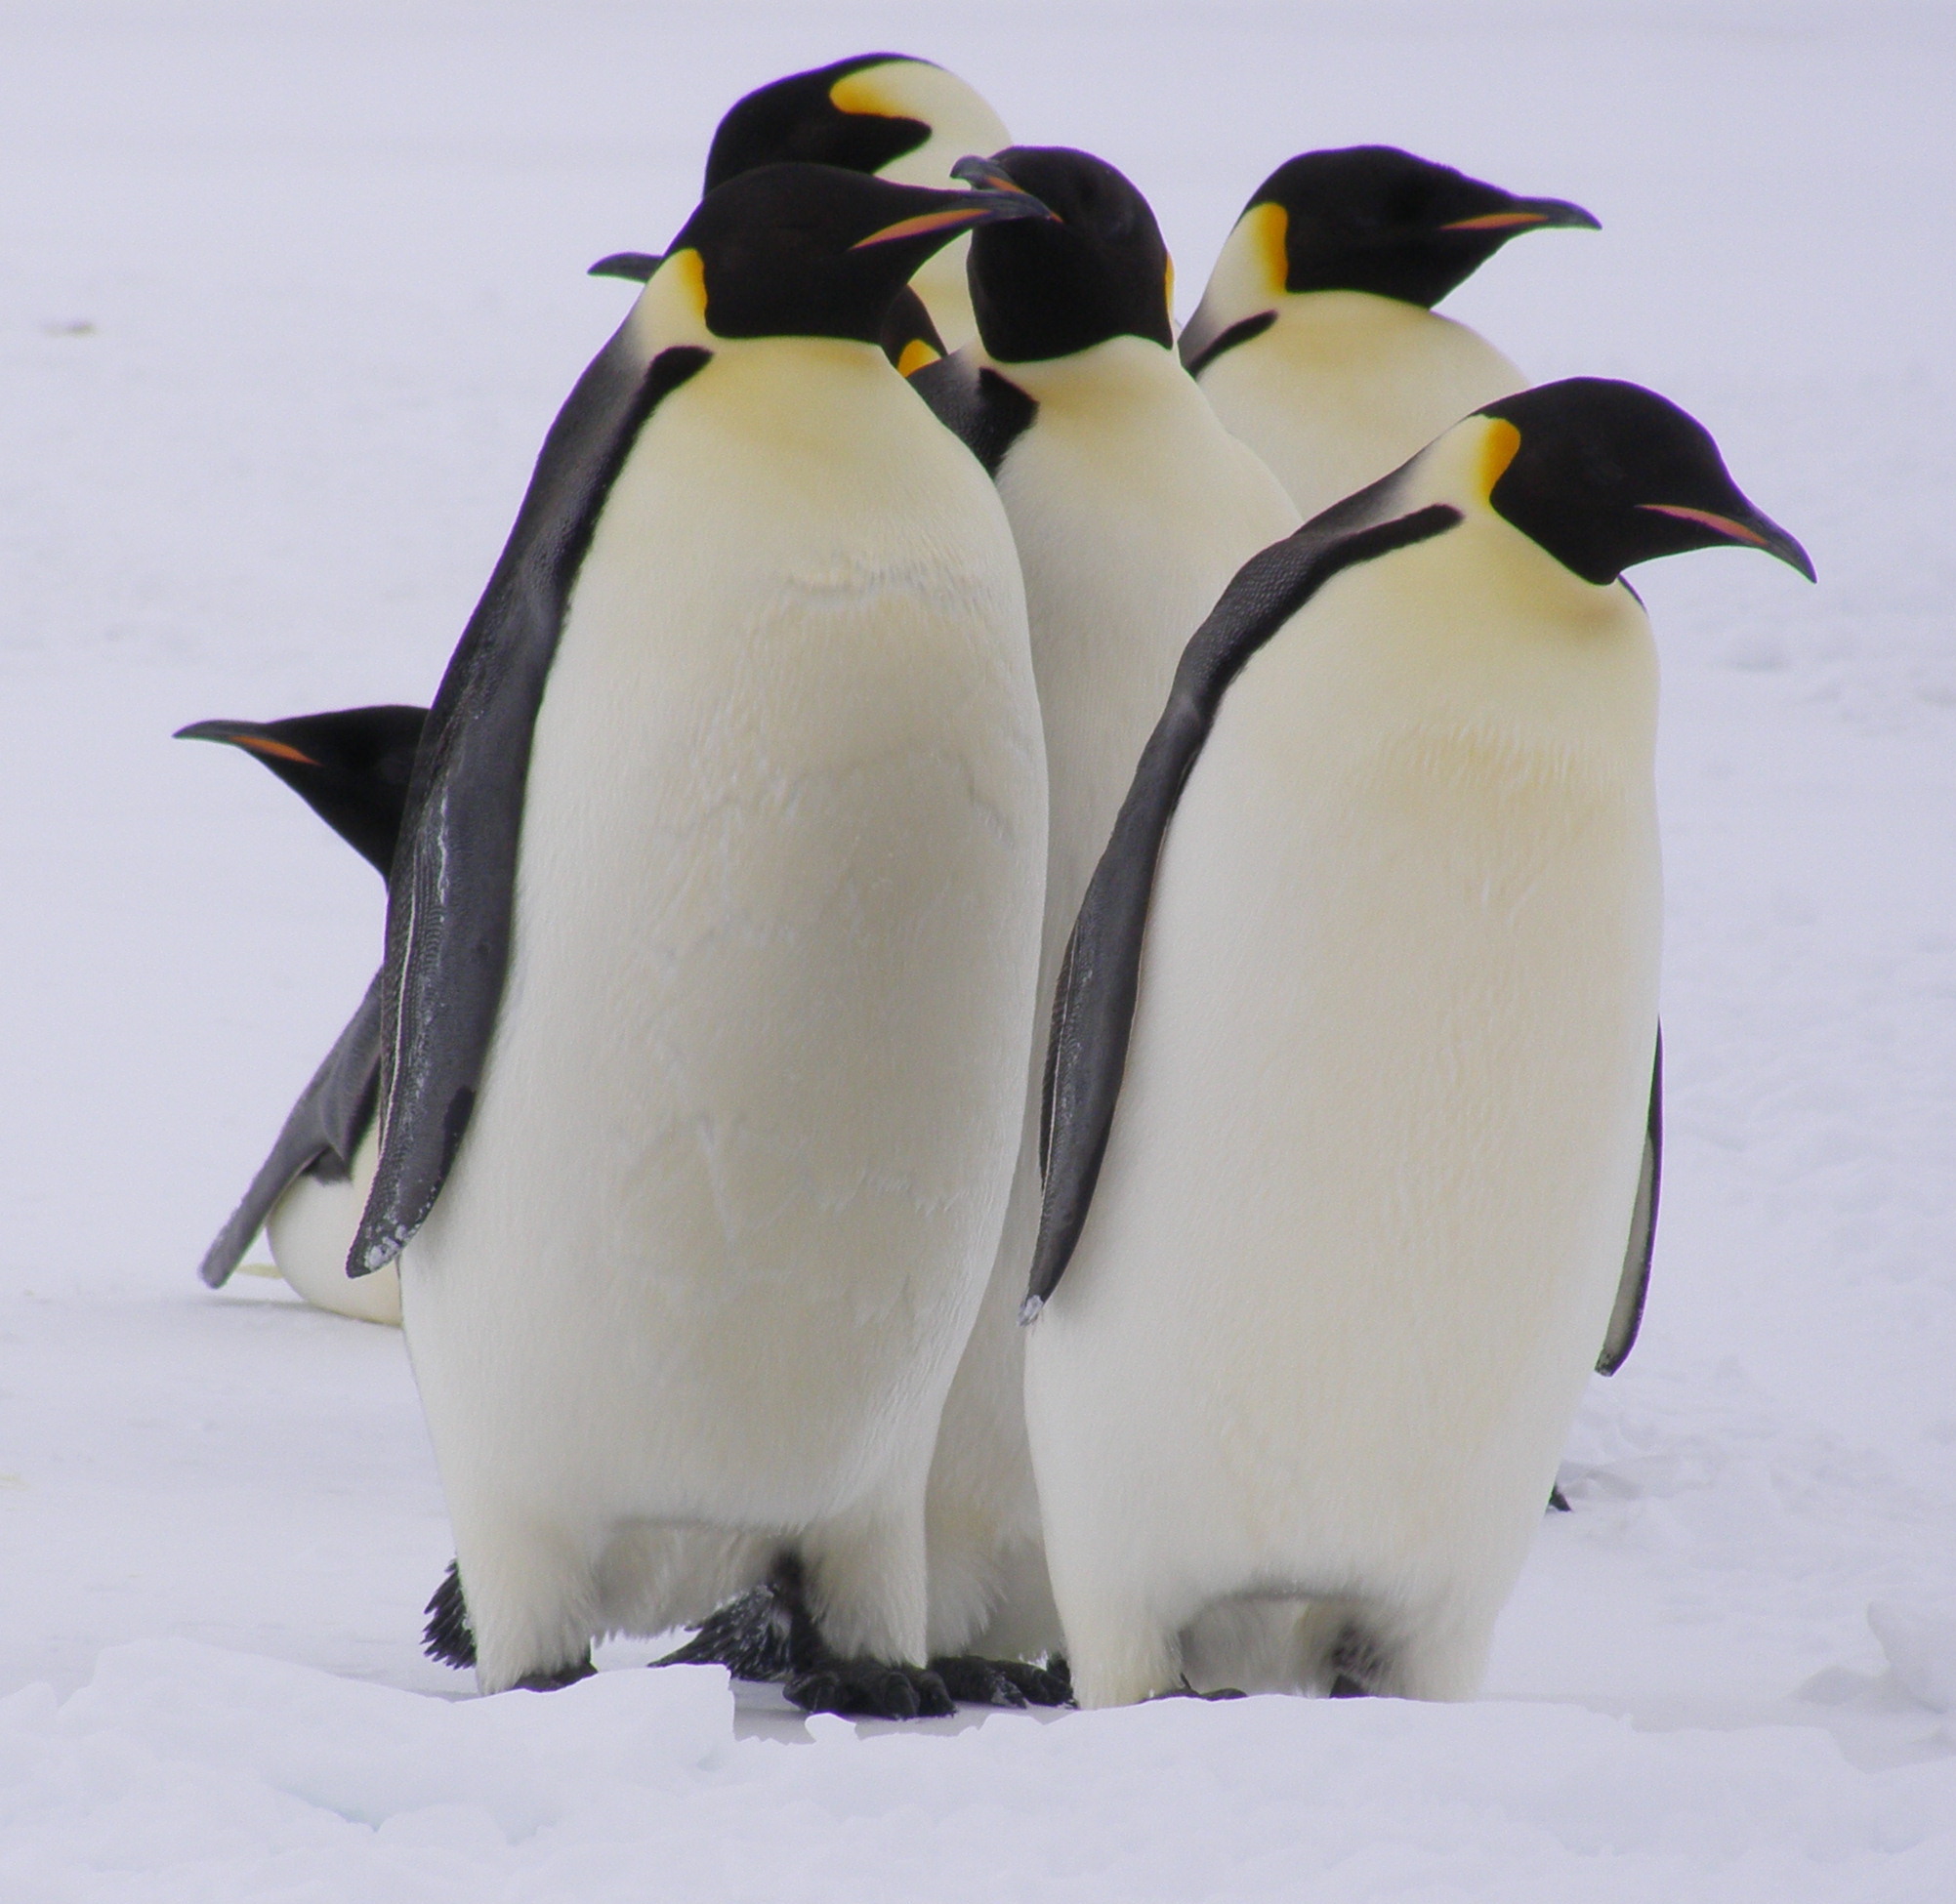 The Emperor penguins get together and seem to conference about the intentions of these strange red-jacketed aliens who have landed on the sea-ice.